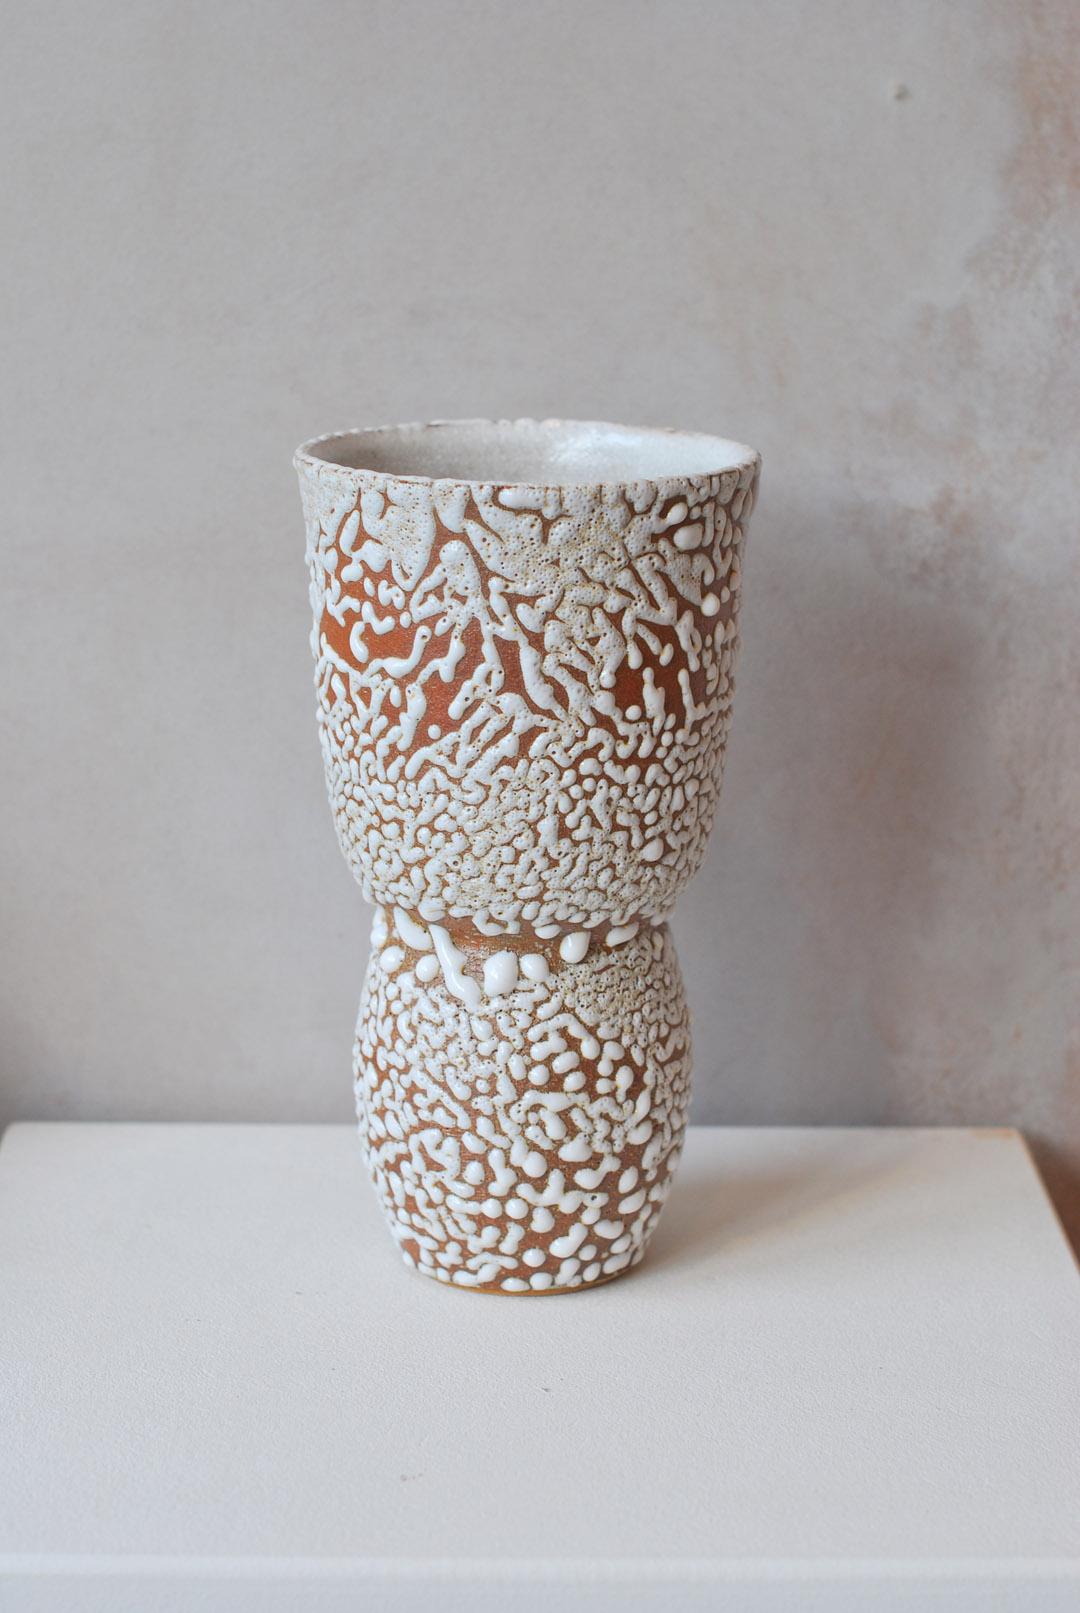 C-019 white stoneware vase by Moïo Studio
Dimensions: D12 x W12 x H21 cm
Materials: White crawl glaze on tan stoneware
Made by hand on the wheel
Unique piece, consult for multiples

Is the Berlin-based ceramic art studio of French-Palestinian